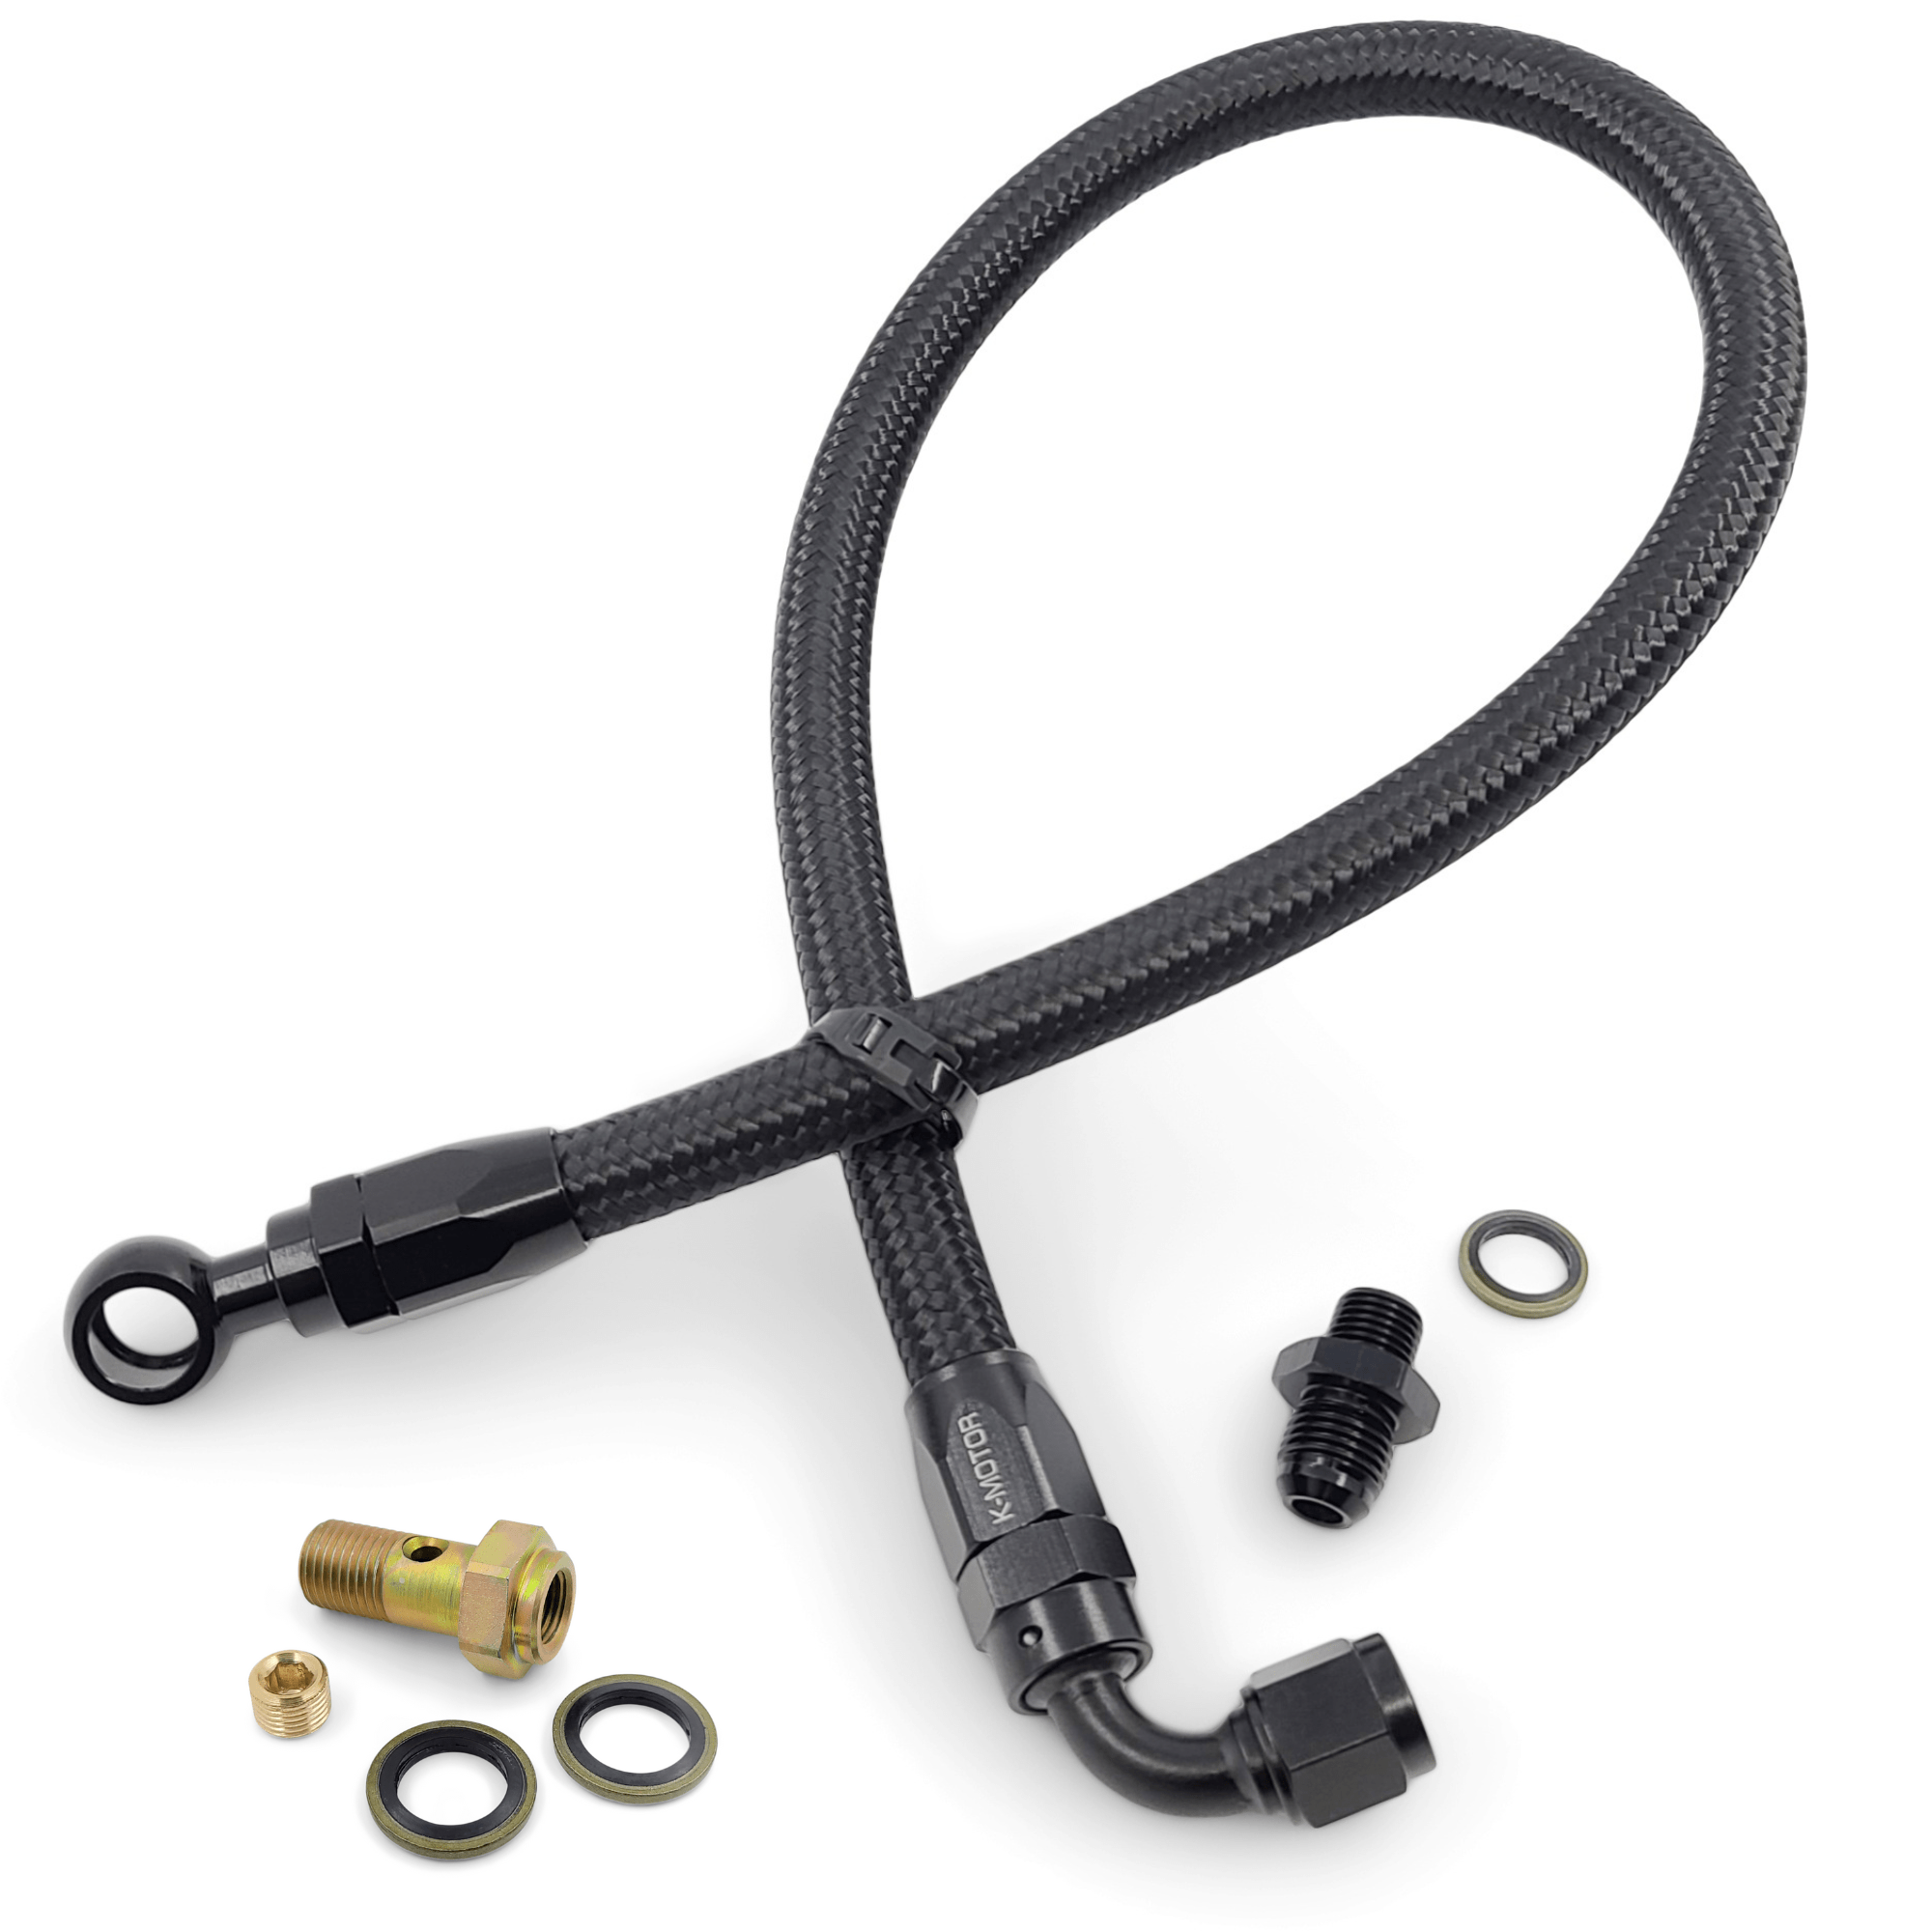 https://kmotorperformance.com/wp-content/uploads/2018/04/Braided-Fuel-Line-Kit-with-Banjo-Compatible-with-HondaAcura-Integra-Civic-Crx-Accord-D15-D16-B16-B18-B20-Banjo-to-90-Degree-3.png